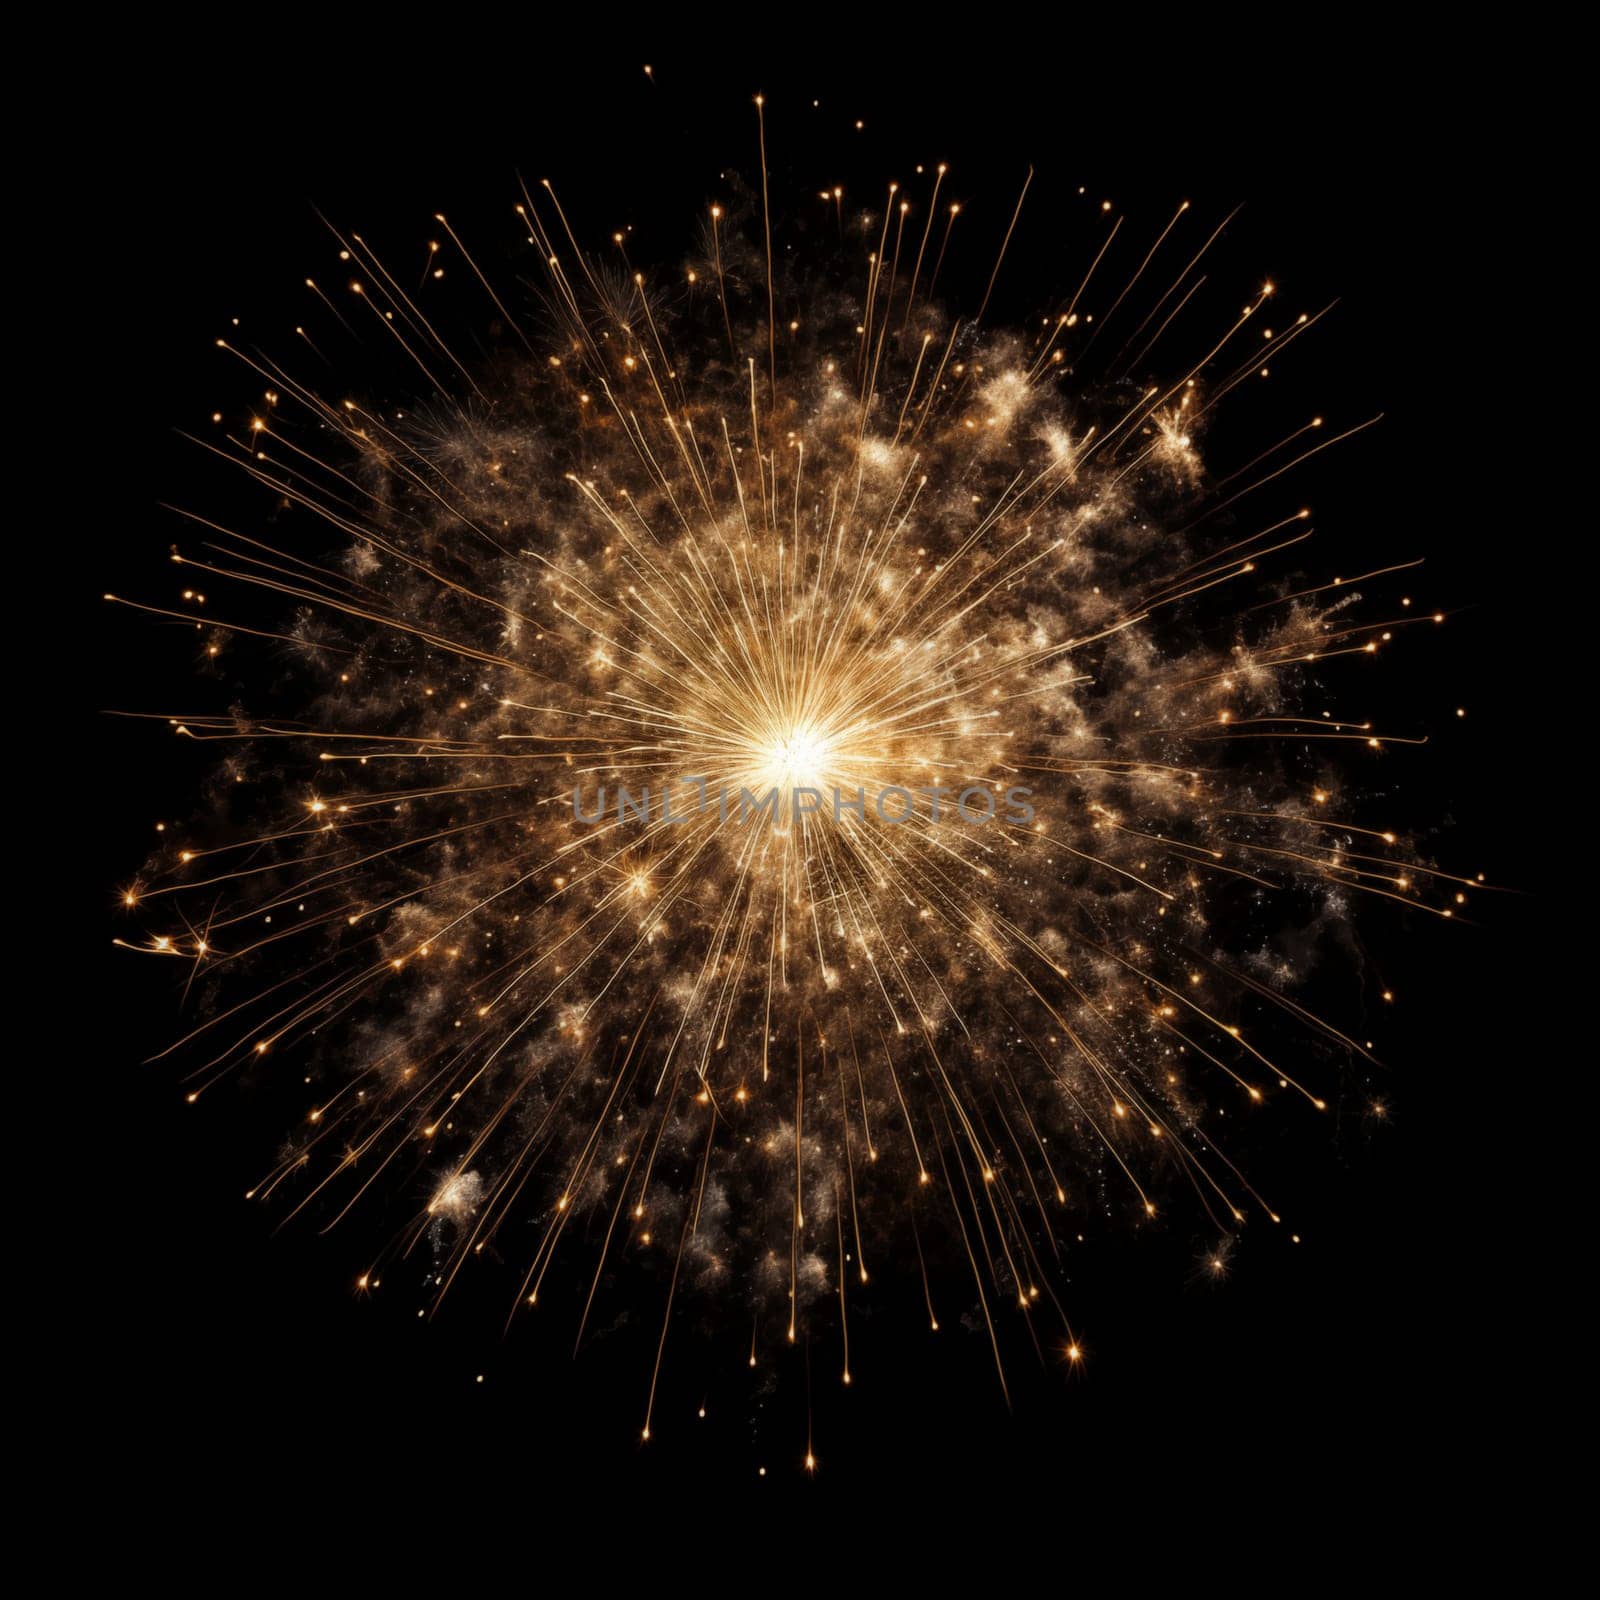 One golden fireworks on black background isolated.